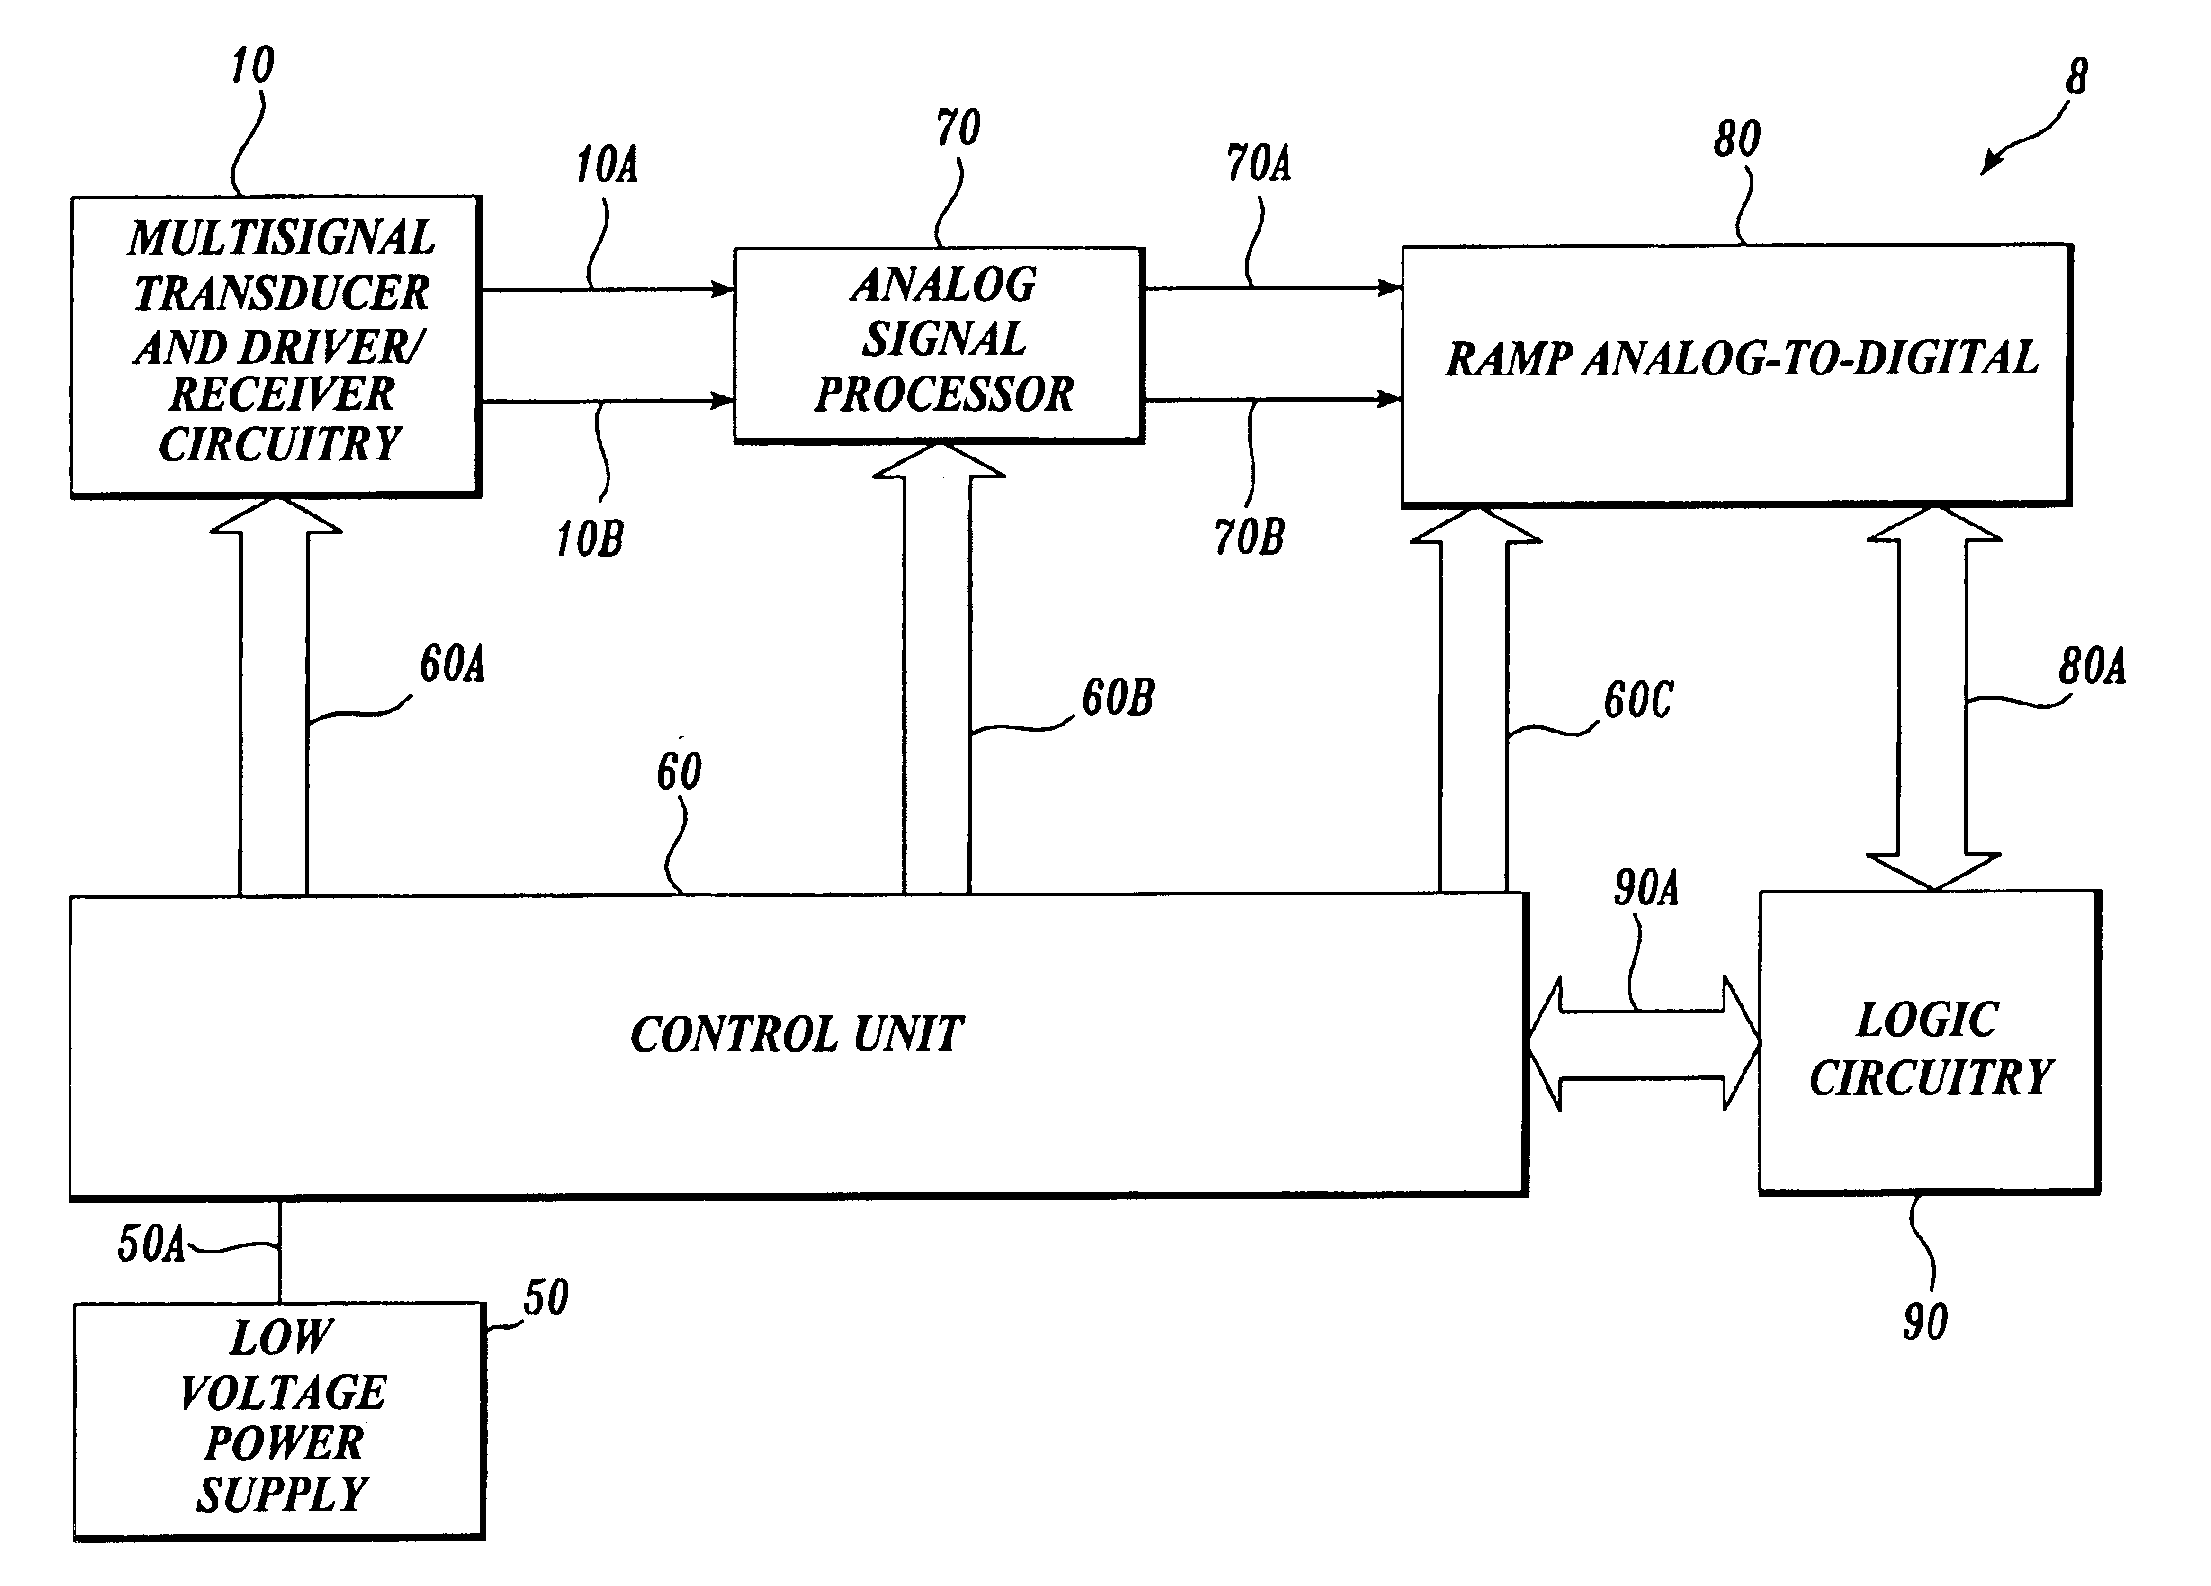 Low voltage low power signal processing system and method for high accuracy processing of differential signal inputs from a low power measuring instrument